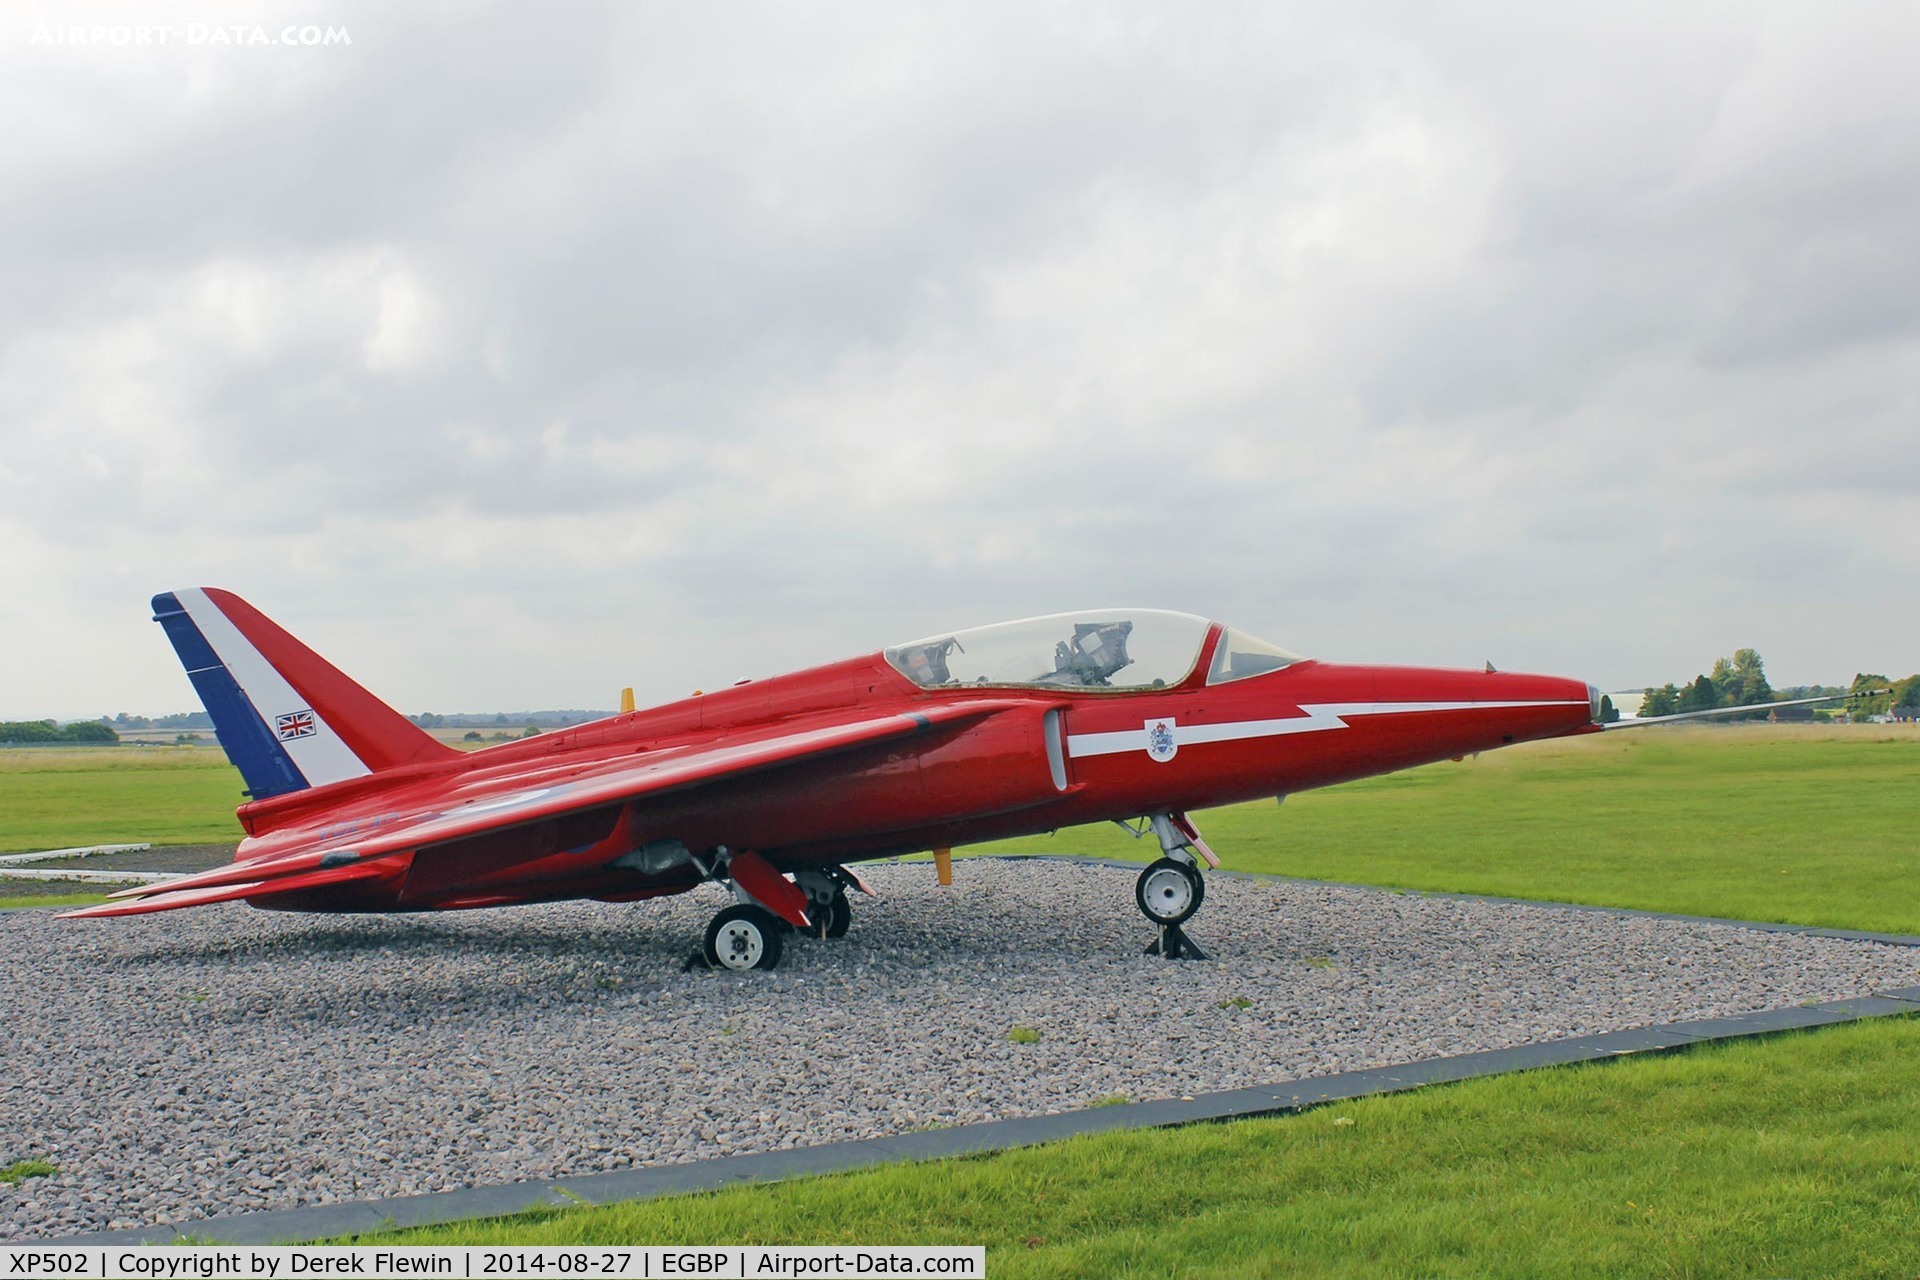 XP502, 1962 Folland Gnat T.1 C/N FL517, Seen at kemble, painted up as Red Arrow XR540, XP502 never served in the Red Arrows.